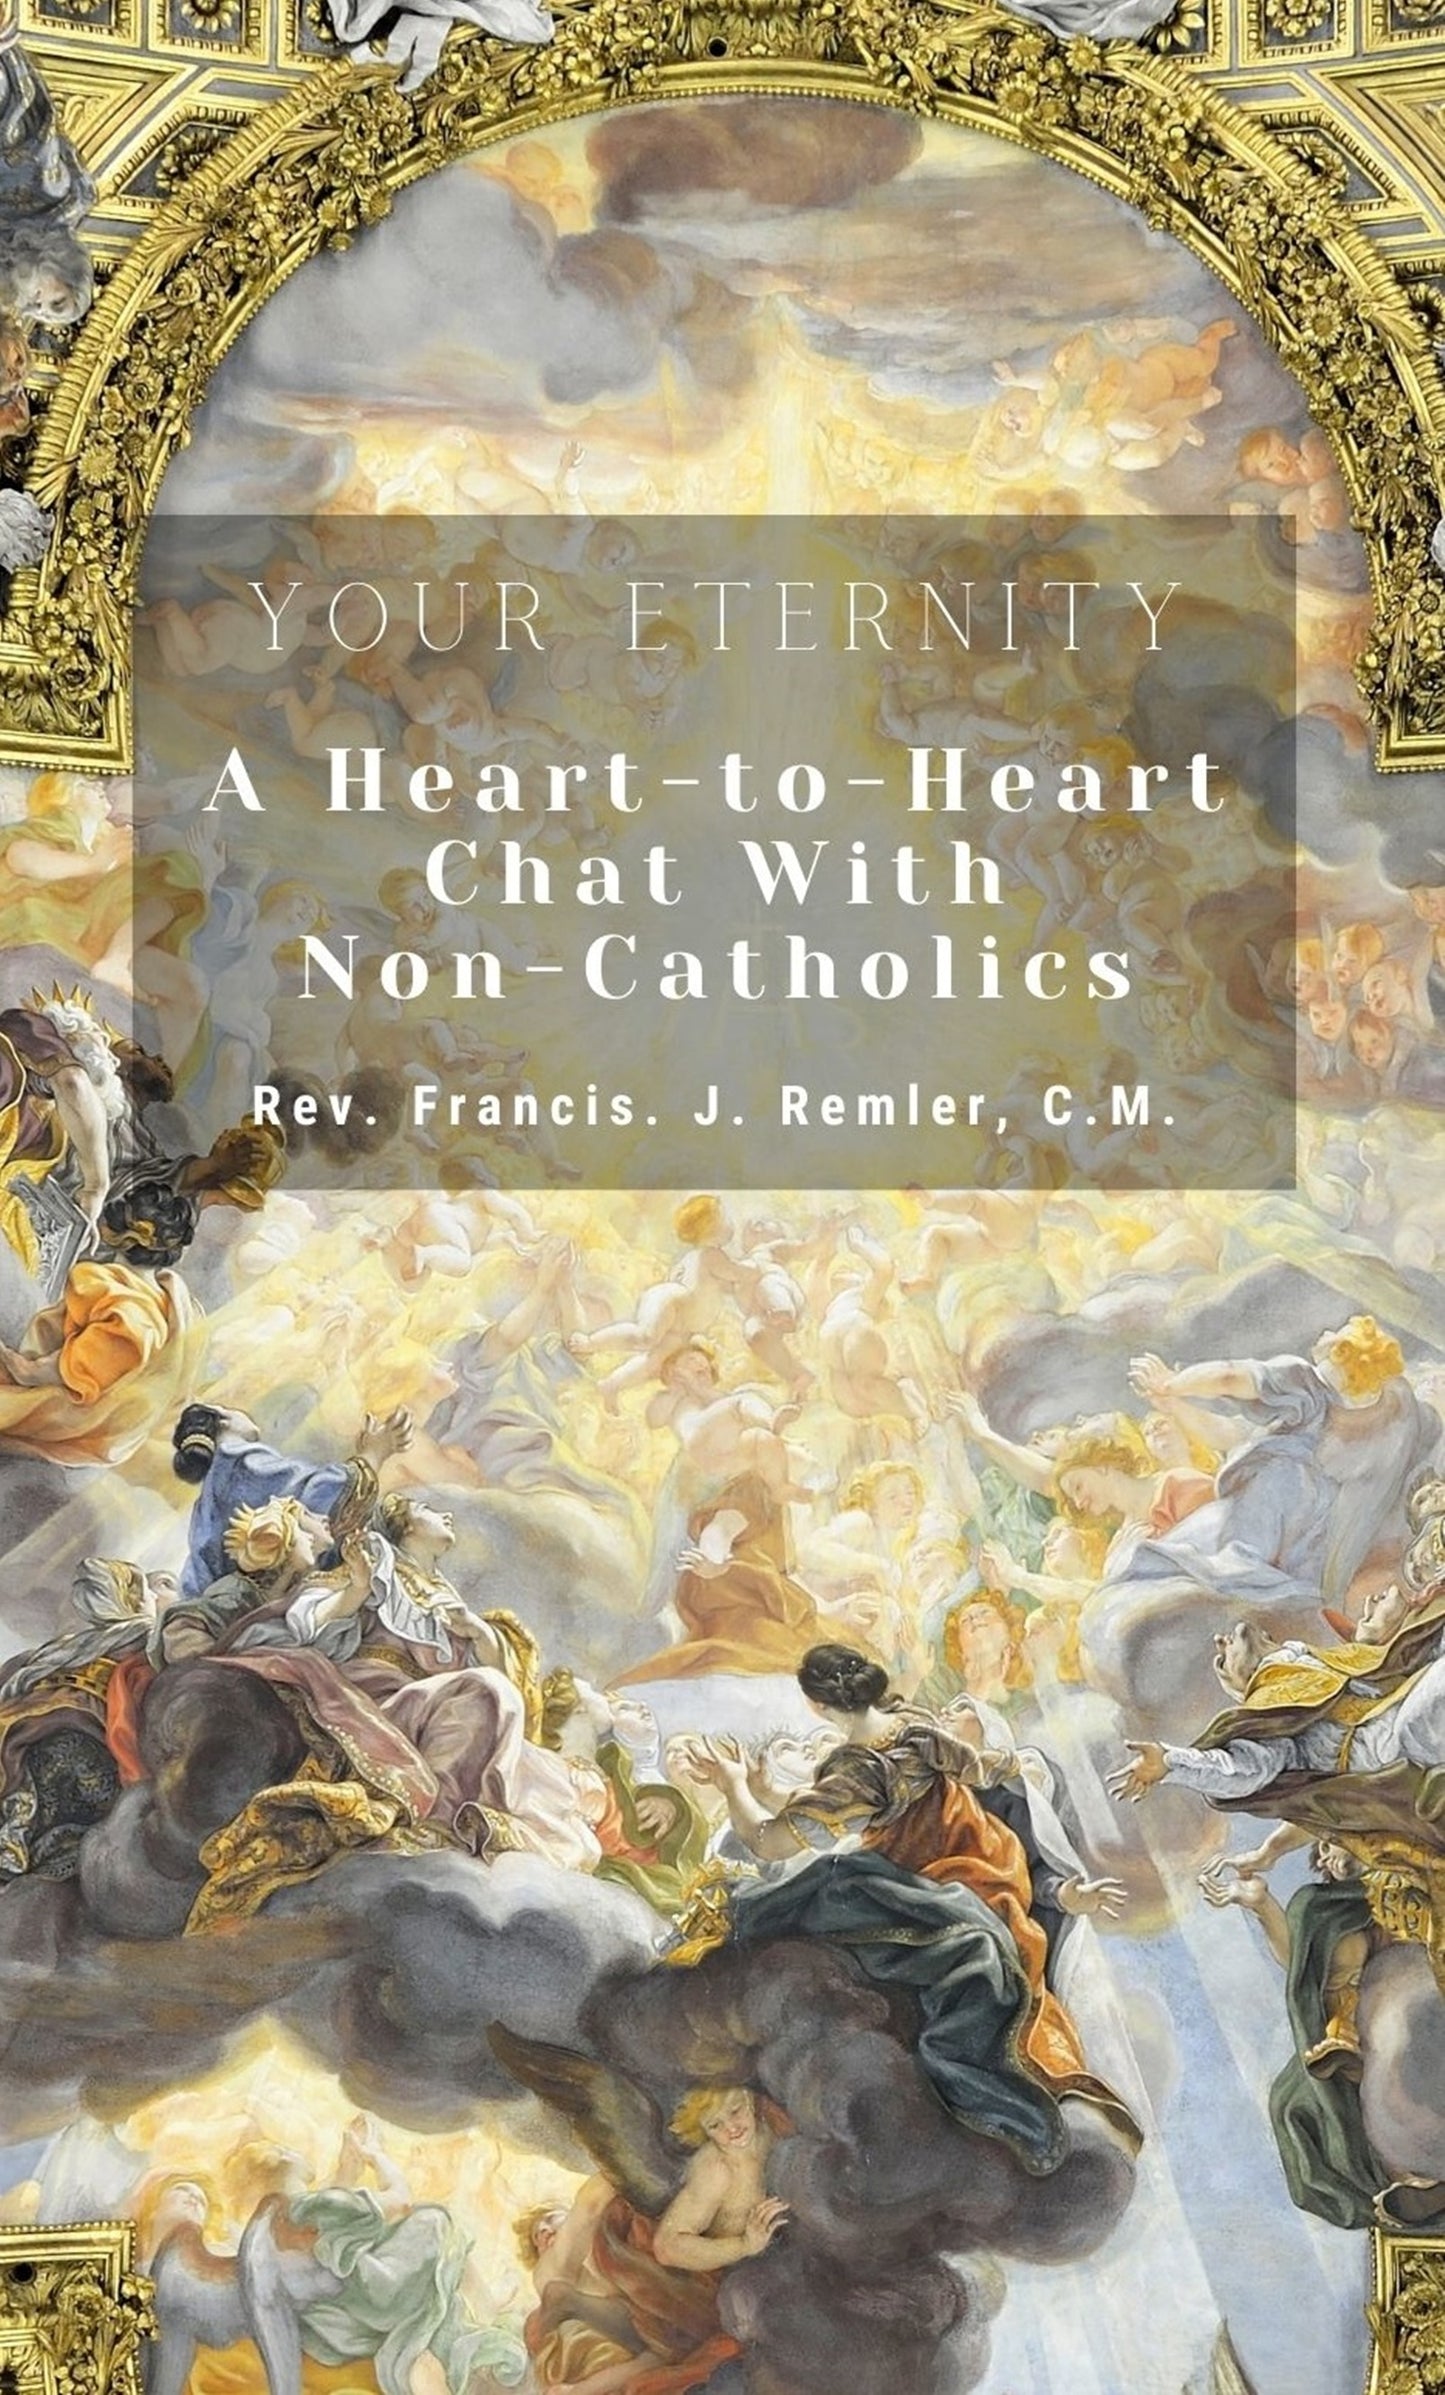 Your Eternity: A Heart-to-Heart Chat with Non-Catholics (ePub)